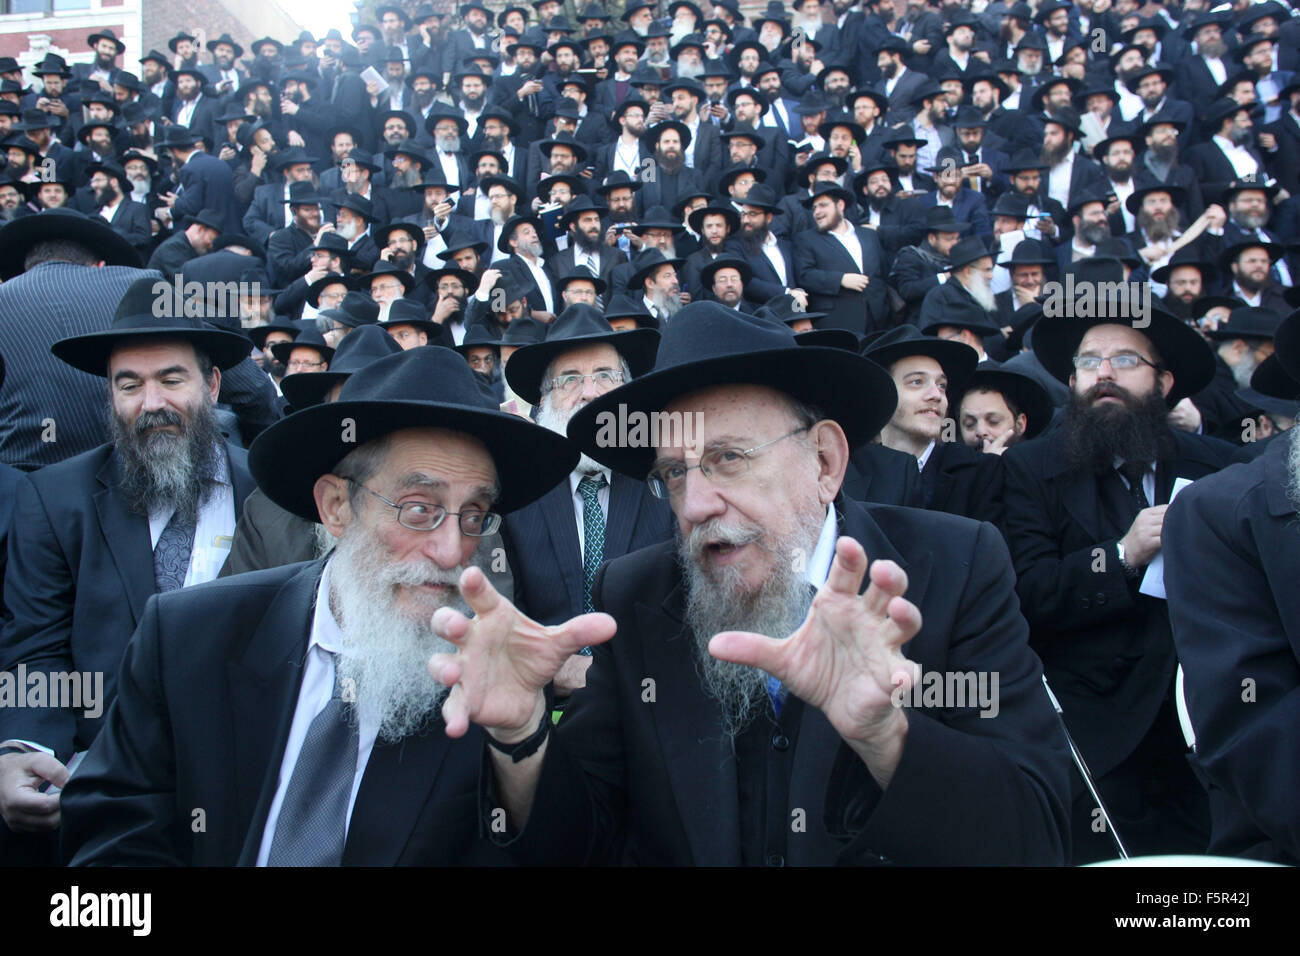 New York, New York, USA. 8th Nov, 2015. Rabbis are seen among a sea of black hats as they pose for a group photo in front of Chabad-Lubavitch world headquarters in Brooklyn borough of New York Sunday November 8, 2015 They are among 4,400 rabbis from around the world who are in New York for the International Conference of Chabad-Lubavitch Emissaries, an annual event aimed at reviving jewish awareness and practice around the world. Credit:  Bruce Cotler/Globe Photos/ZUMA Wire/Alamy Live News Stock Photo